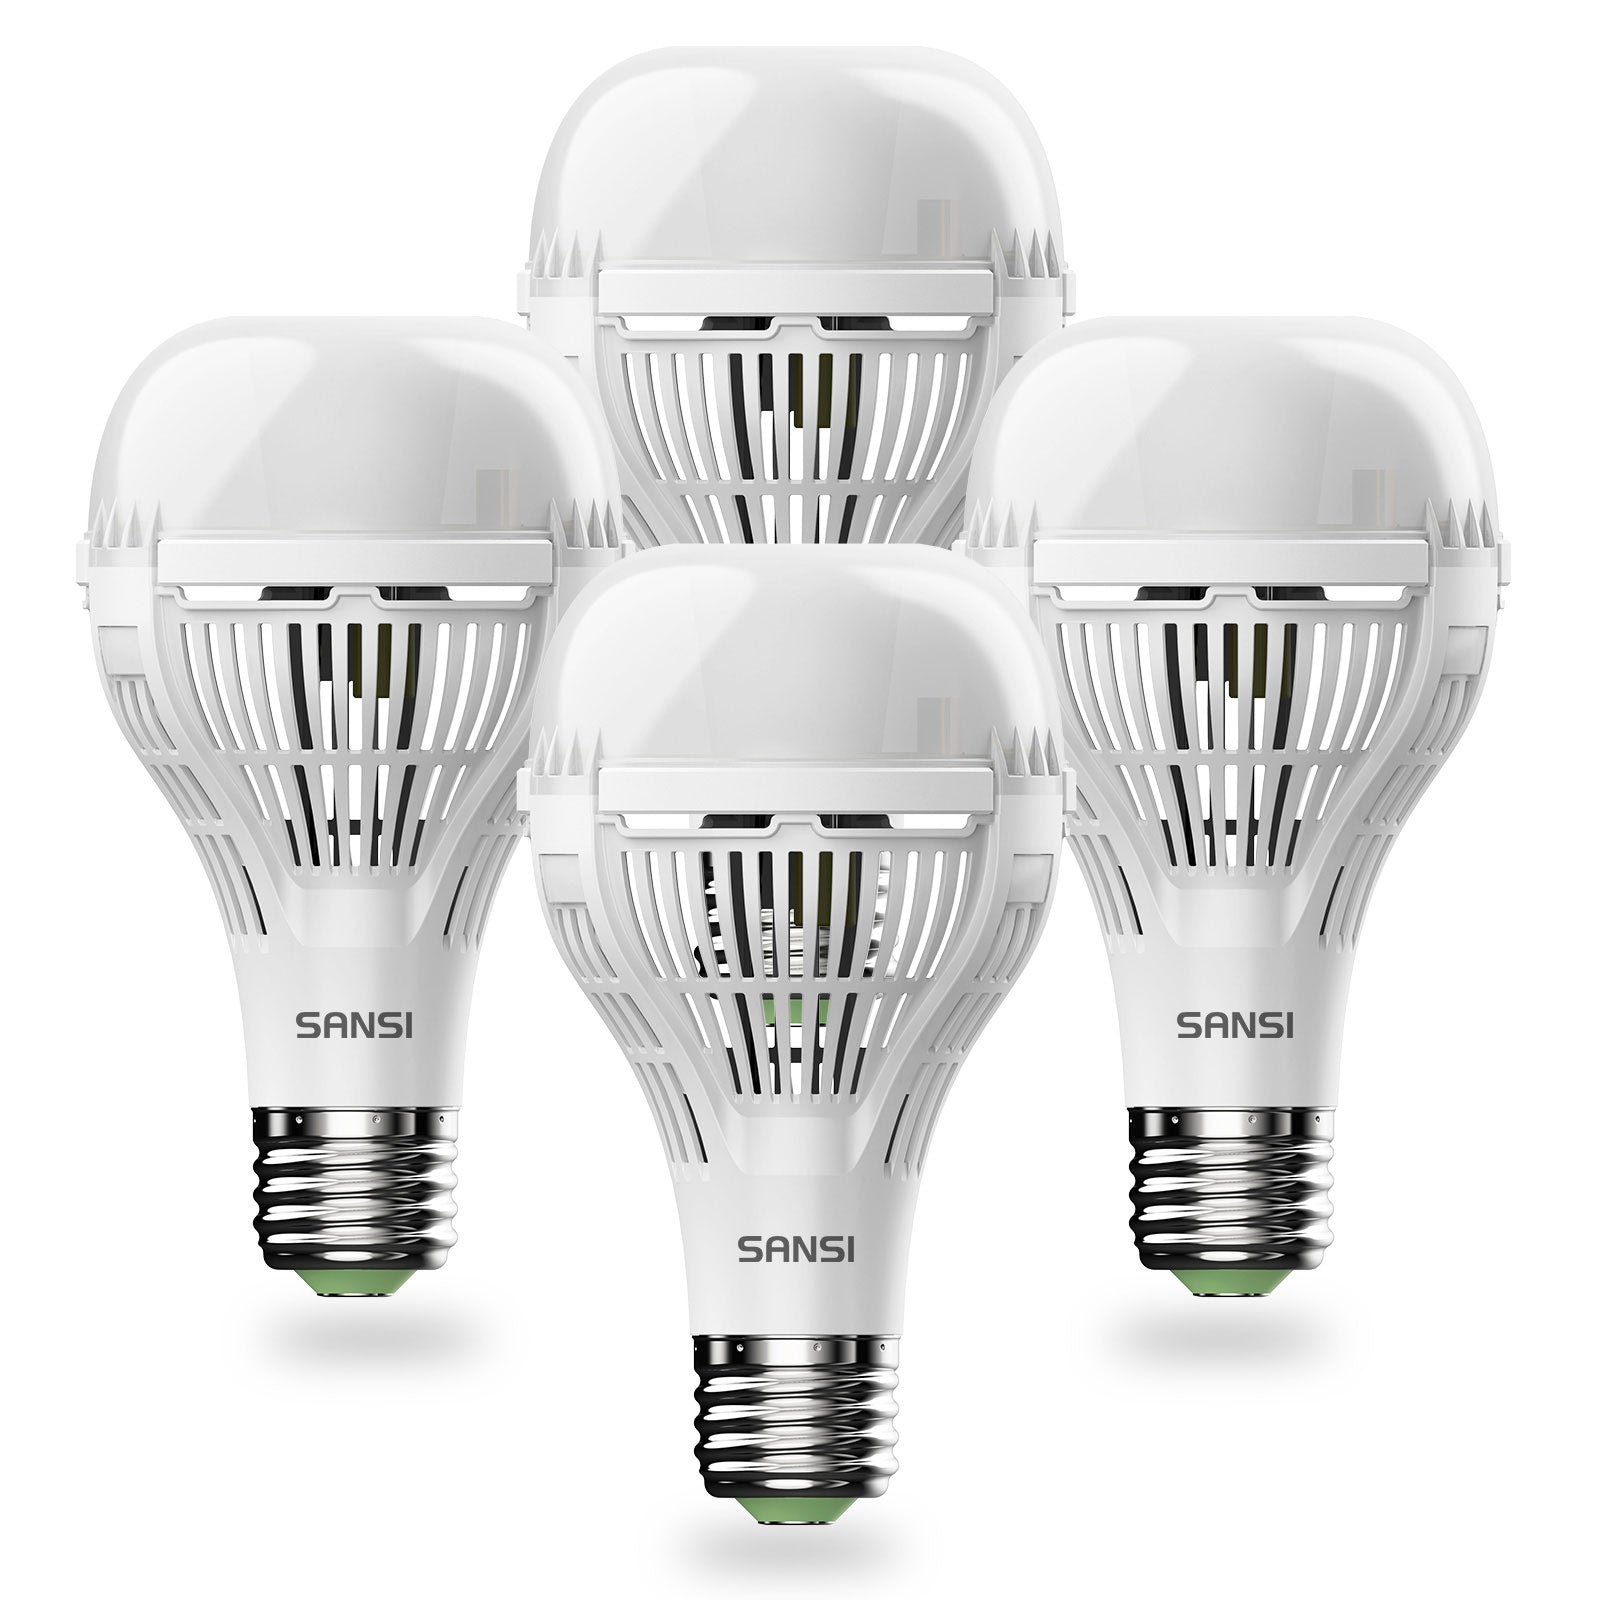 Upgraded A21 18W led light bulb with energy saving for your home,  4 pack